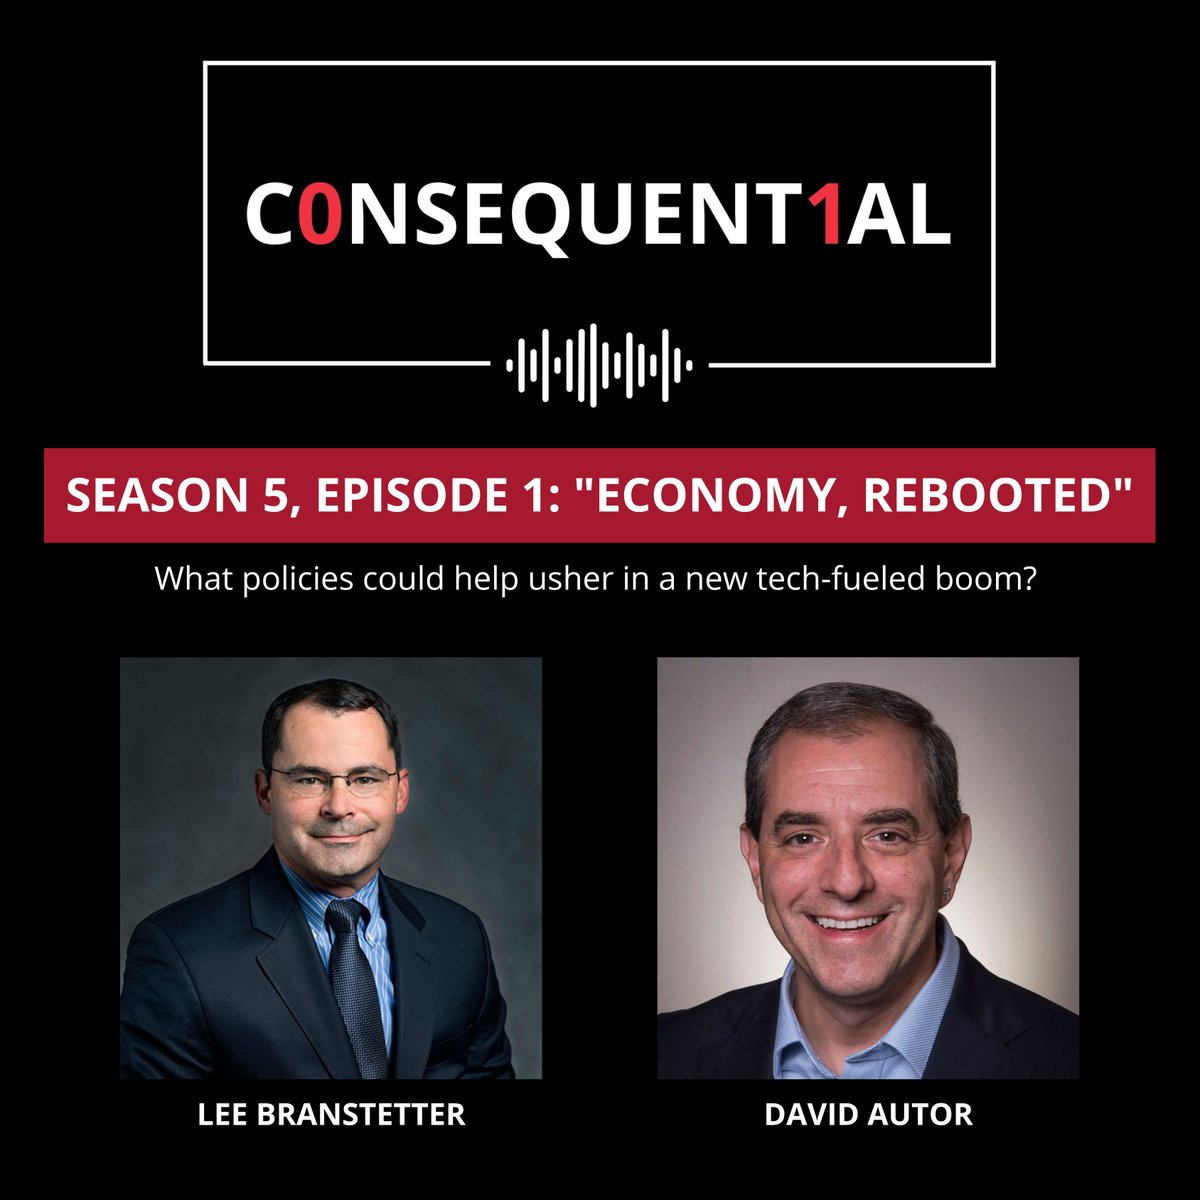 Consequential, a policy podcast from Carnegie Mellon University